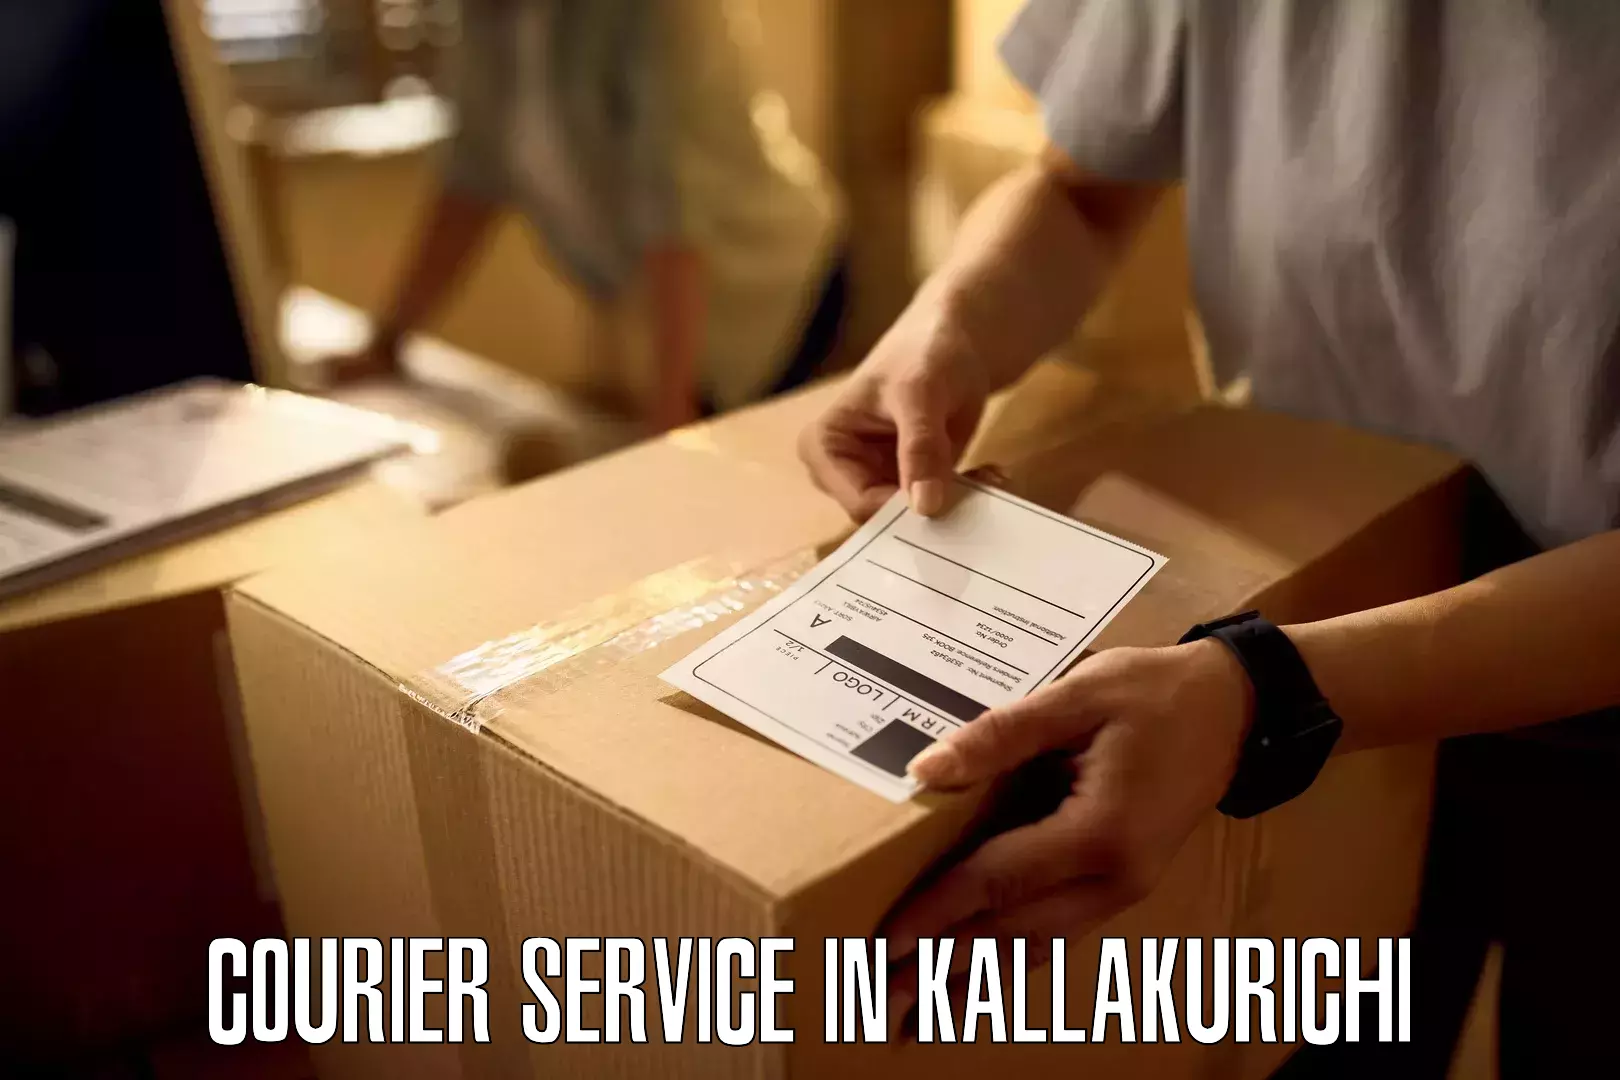 Reliable freight solutions in Kallakurichi